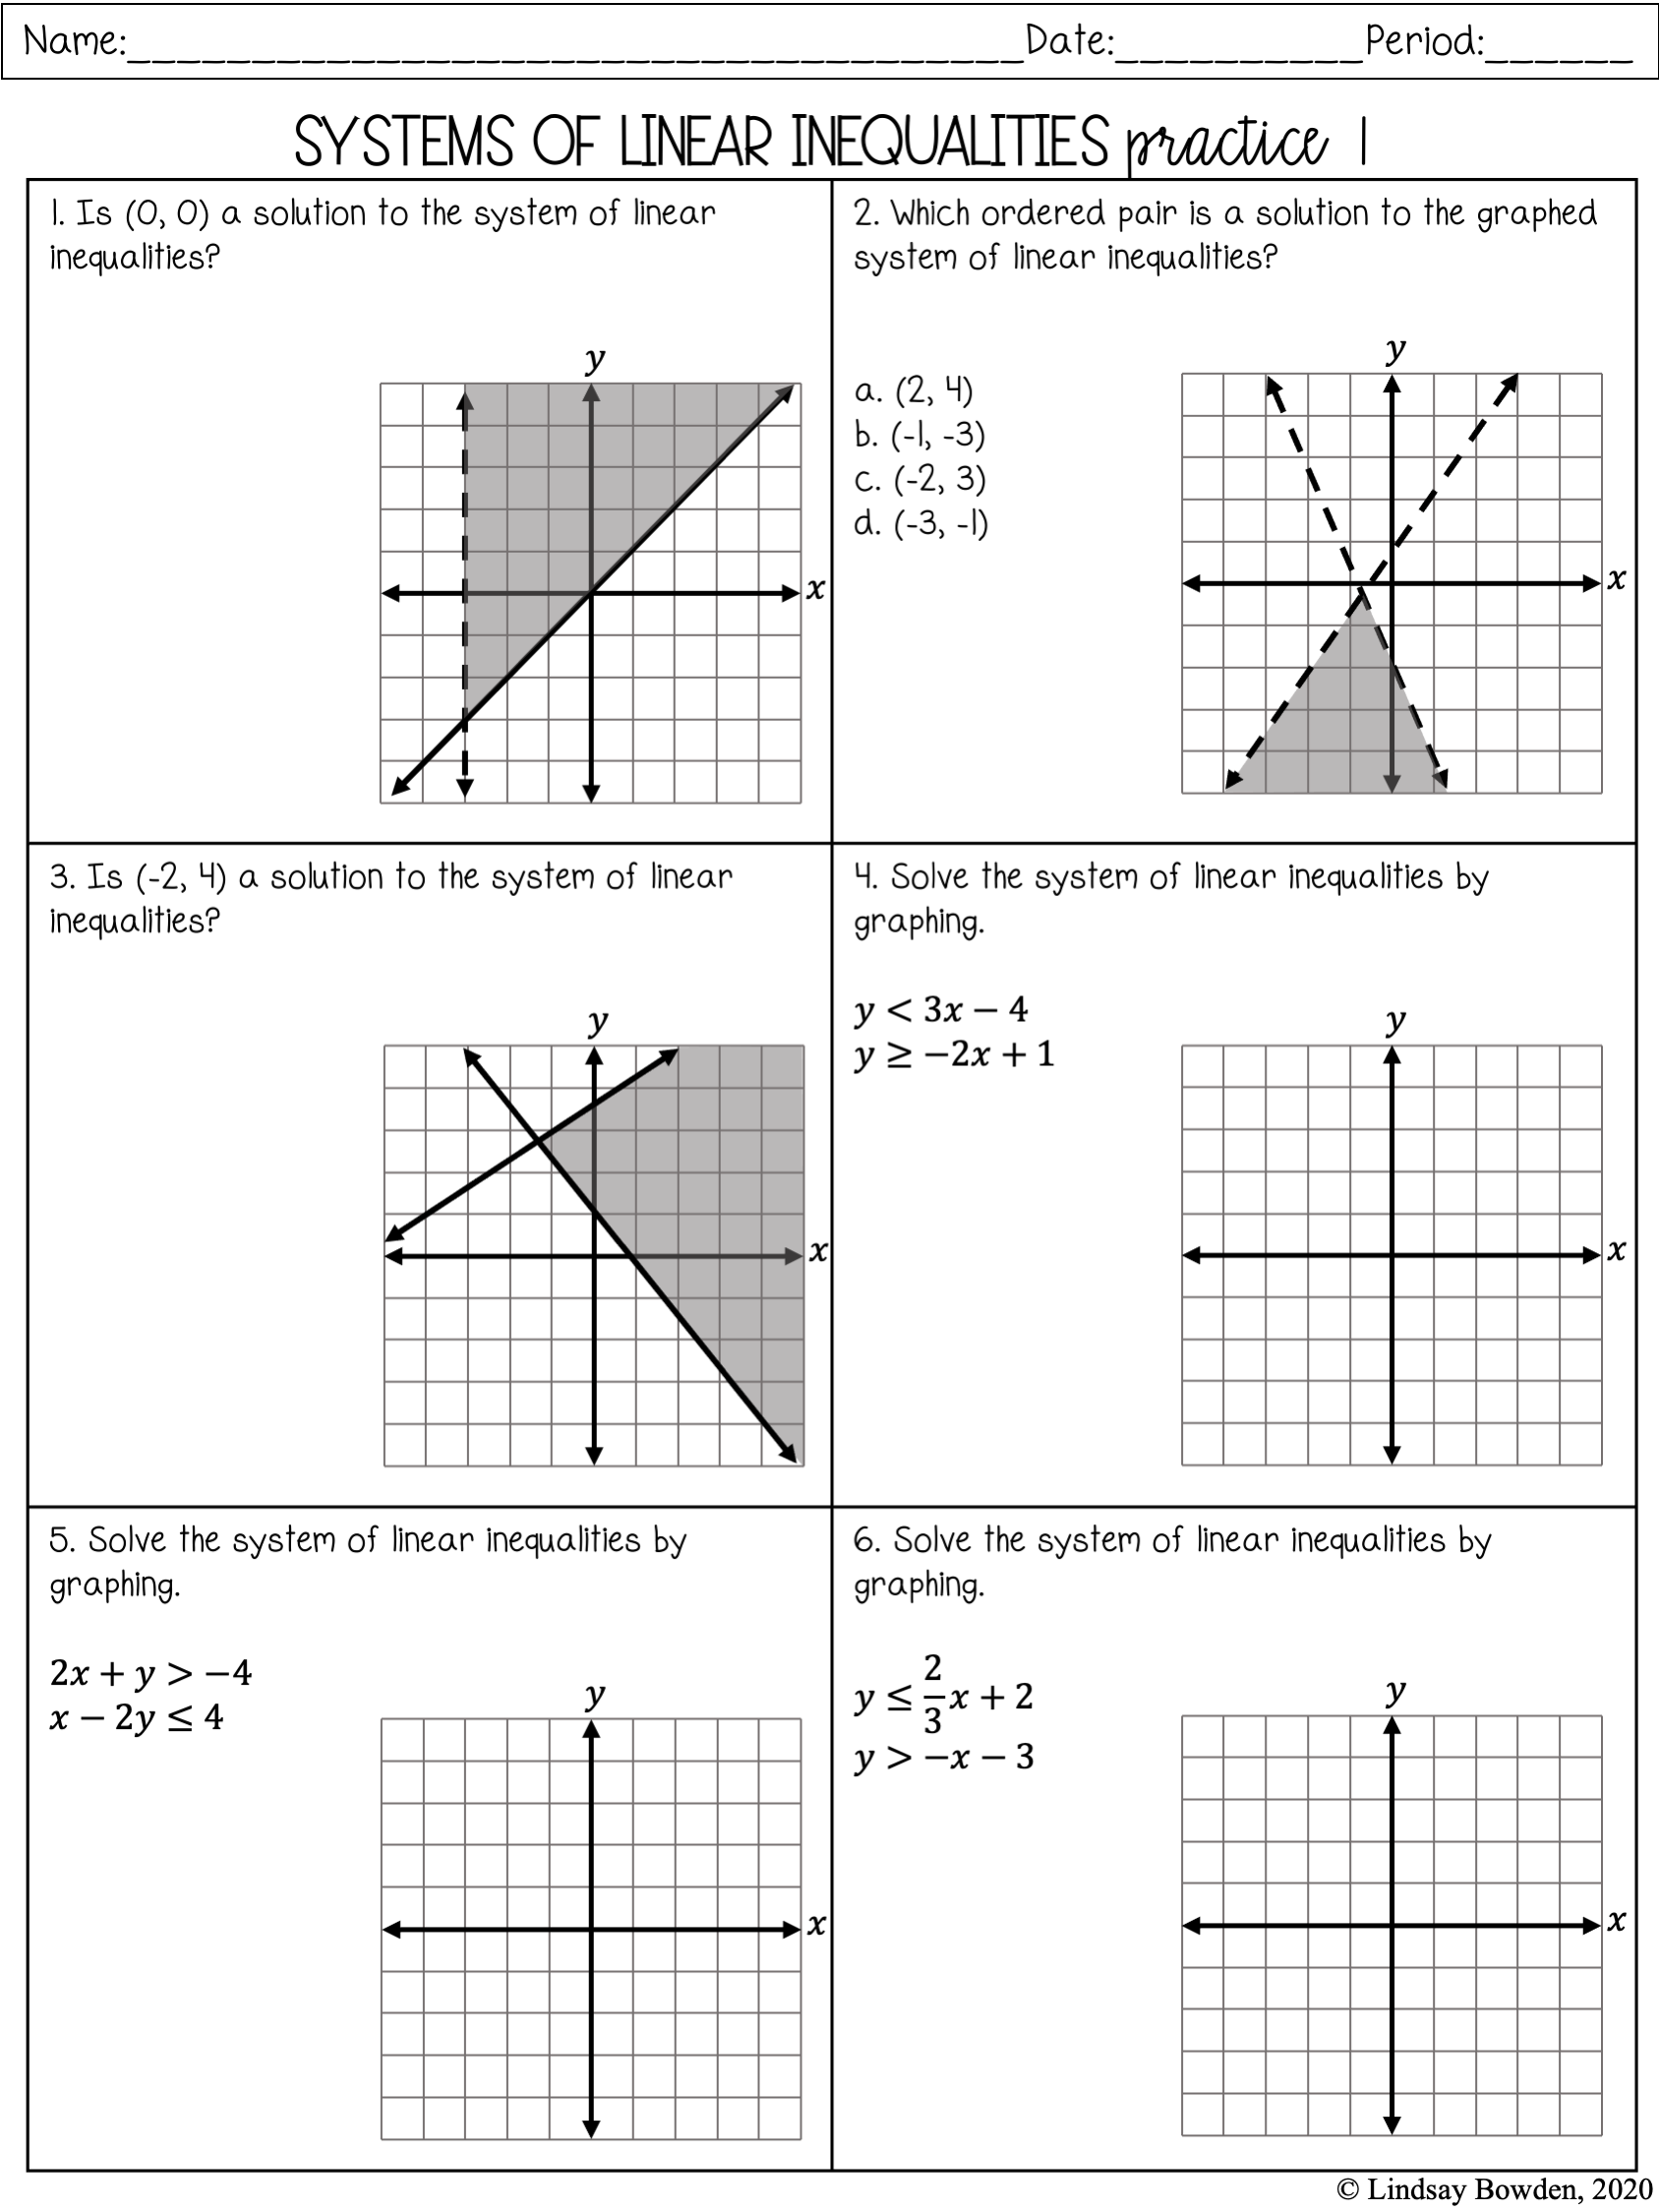 Linear Systems Notes and Worksheets - Lindsay Bowden In Graphing Linear Inequalities Worksheet